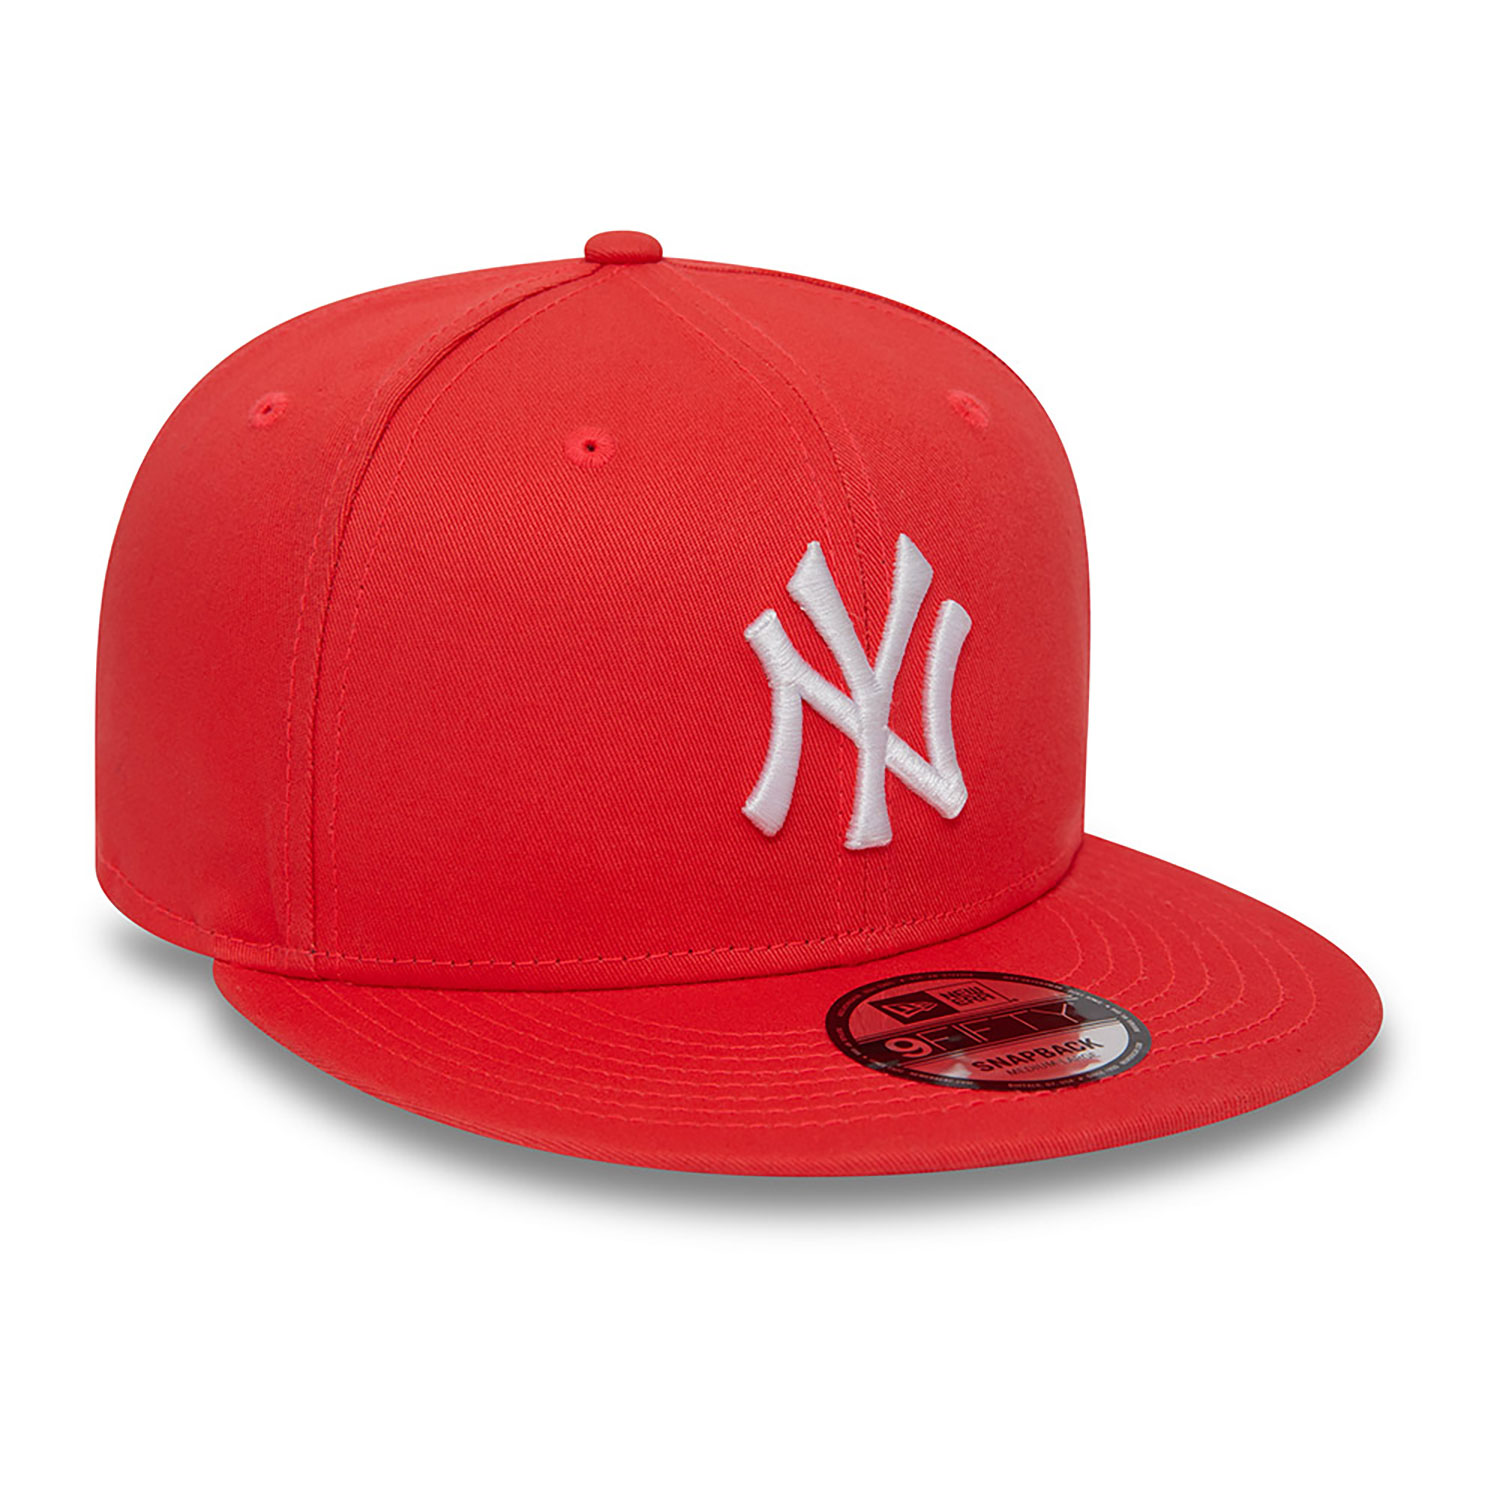 New York Yankees League Essential Red 9FIFTY Adjustable Cap